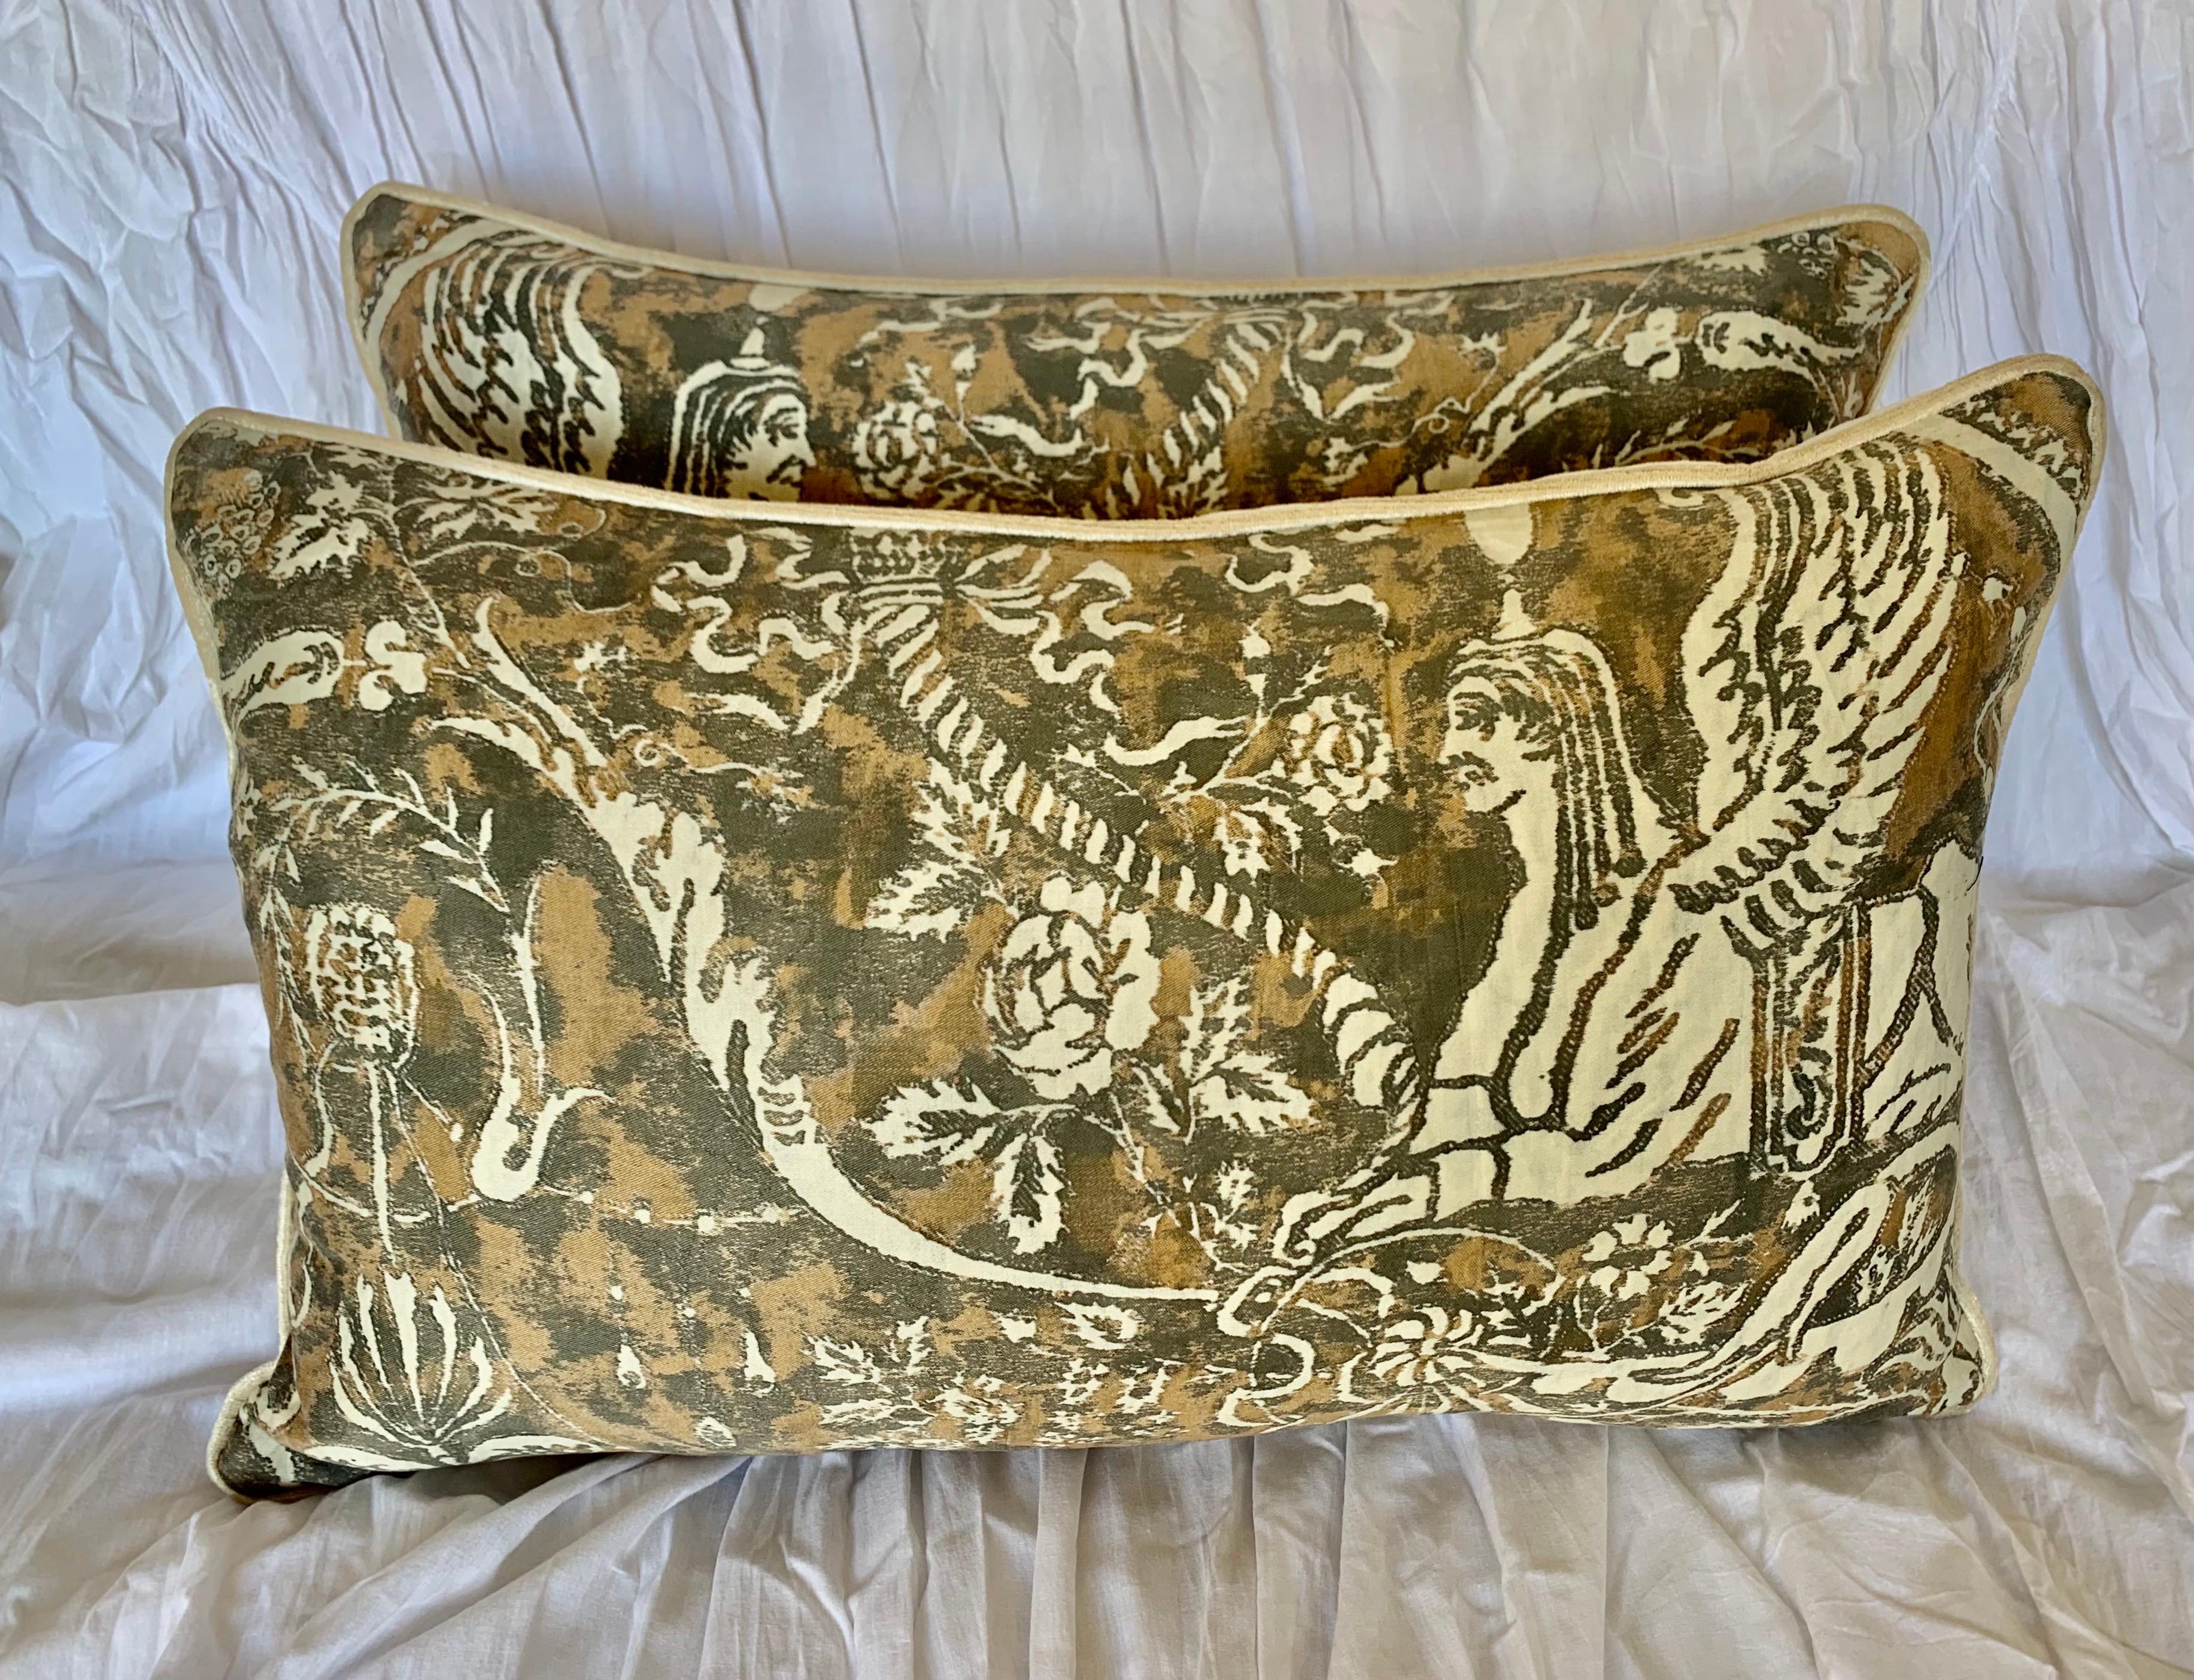 Pair of unique Fortuny textile pillows made with vintage cotton Fortuny fronts depicting Sphinx's. The colors are autumn shades of gold, brown & cream.